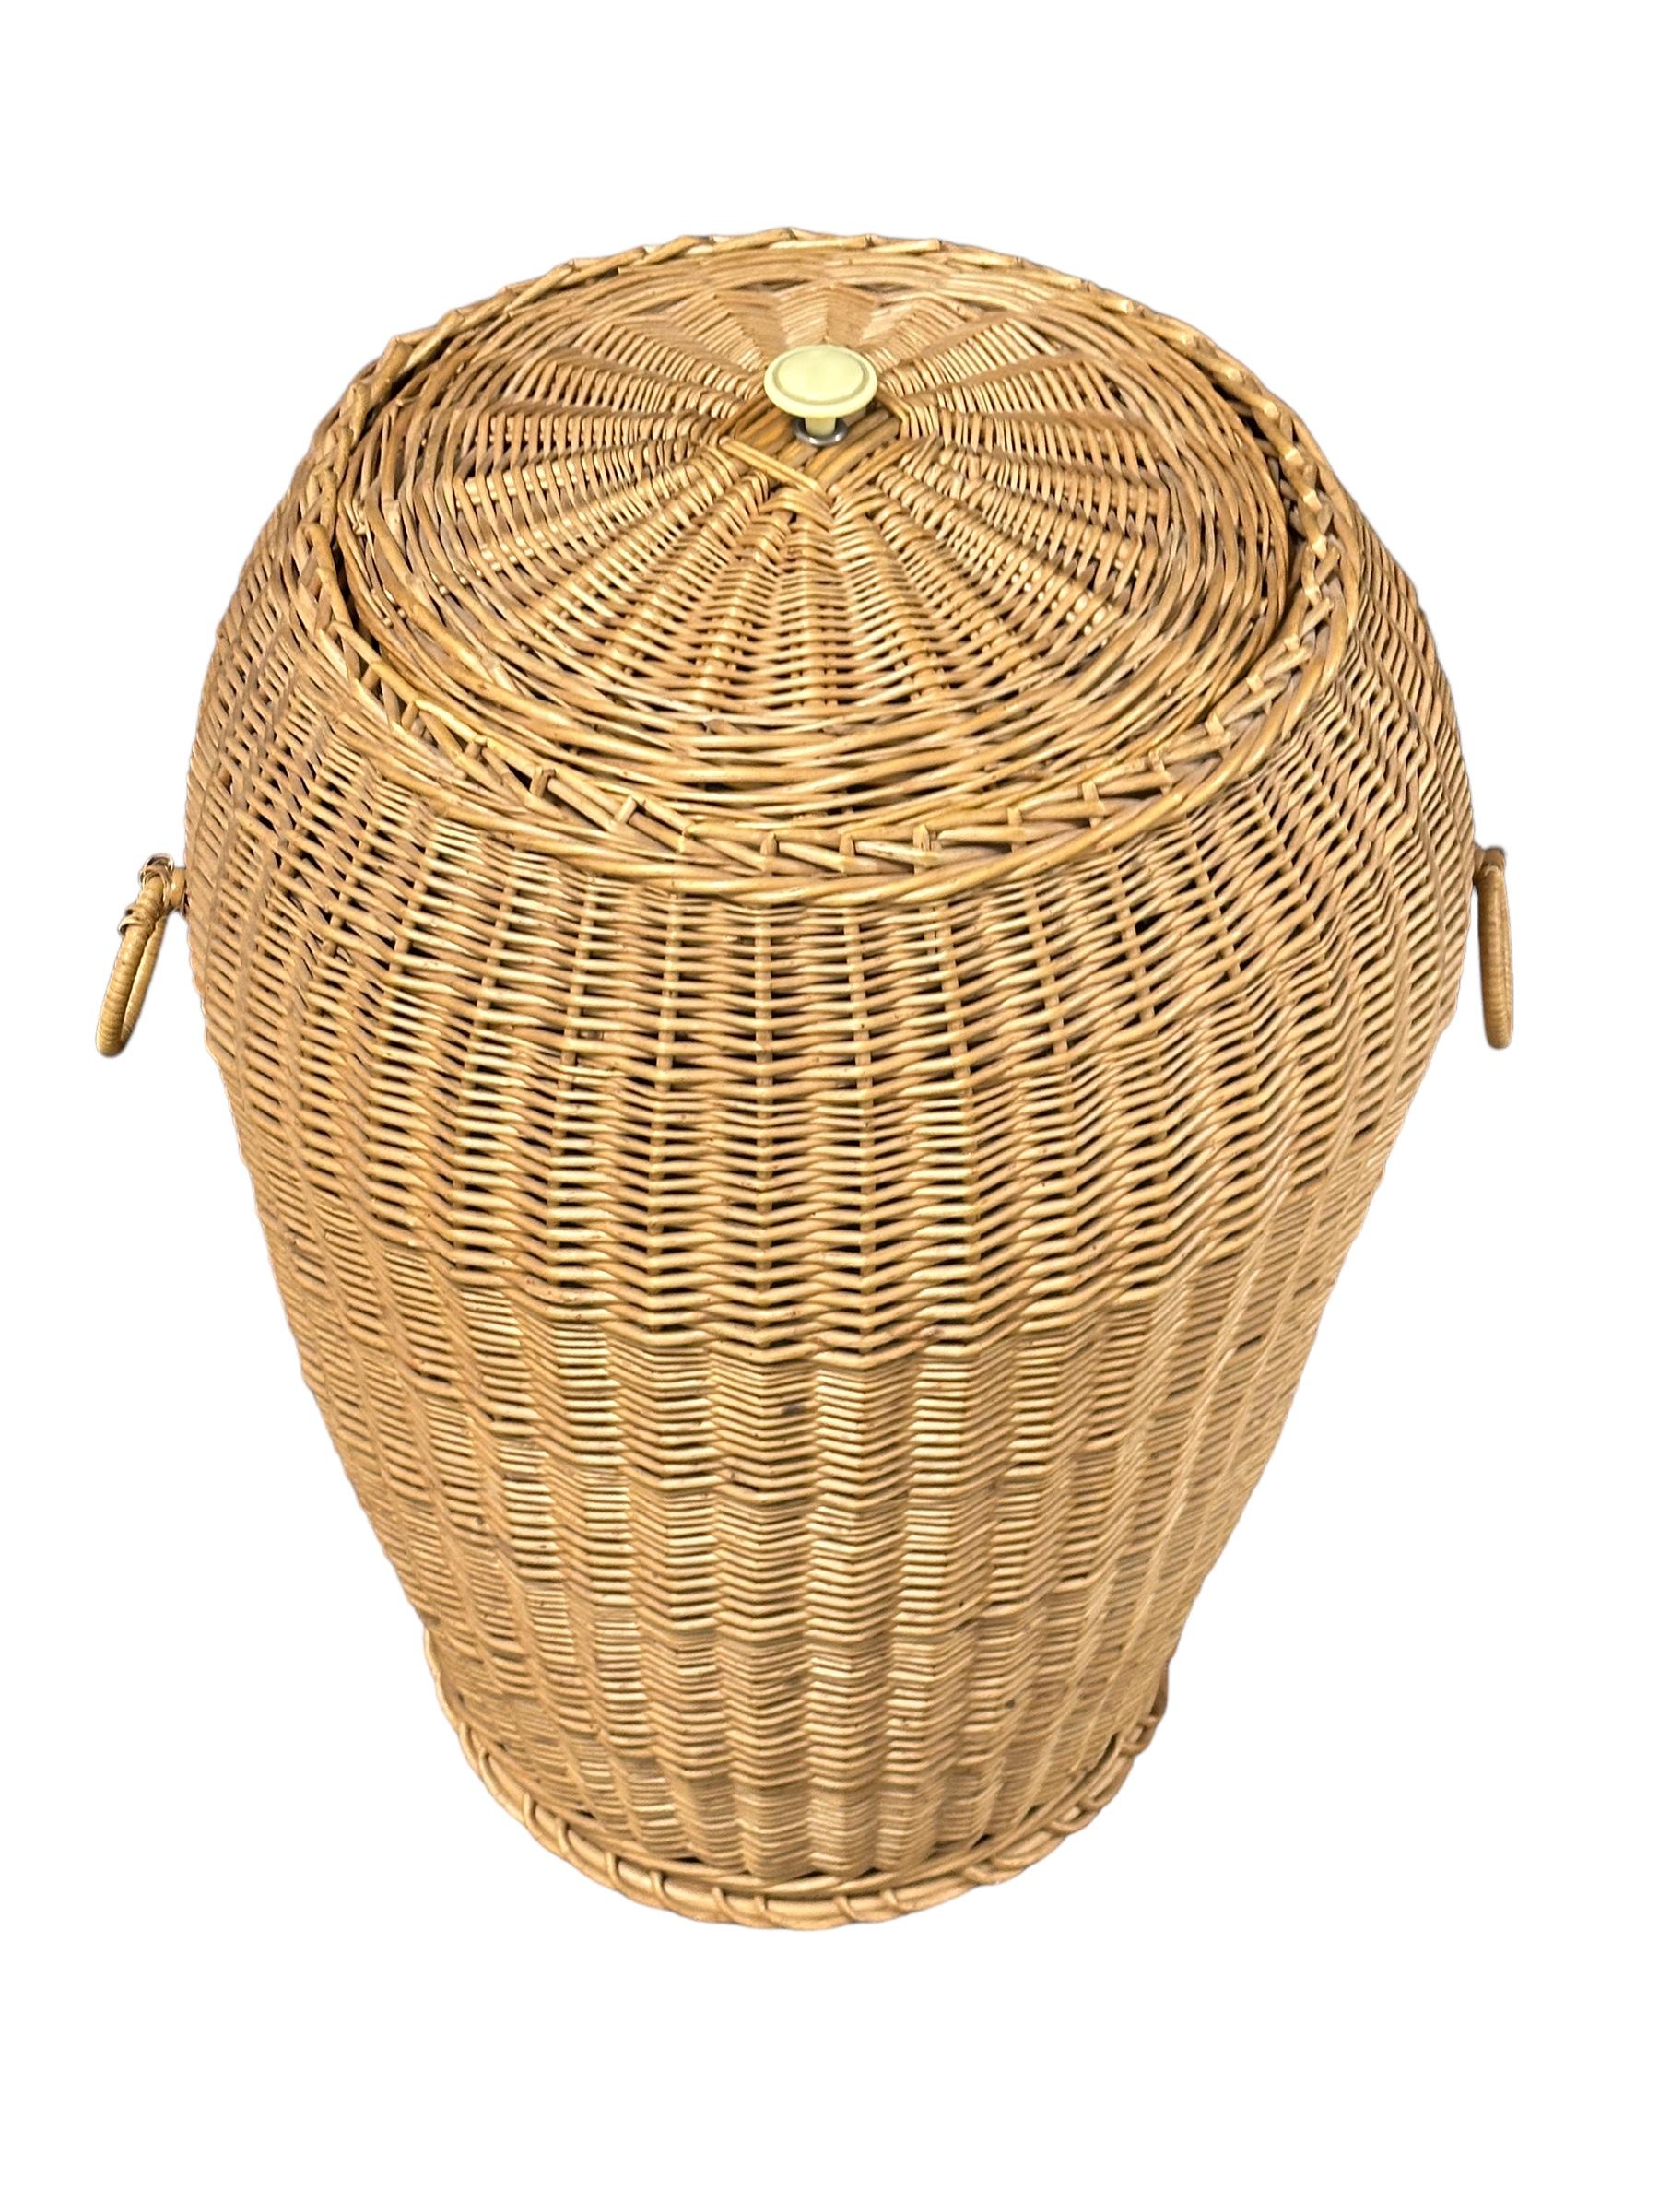 Offered is an absolutely stunning xxlarge 1960s vintage wicker laundry basket hamper with lid and wicker handles. Overall very good vintage condition with light ware consistent with age and use. Found at an Estate Sale in Nuremberg, Germany. A nice